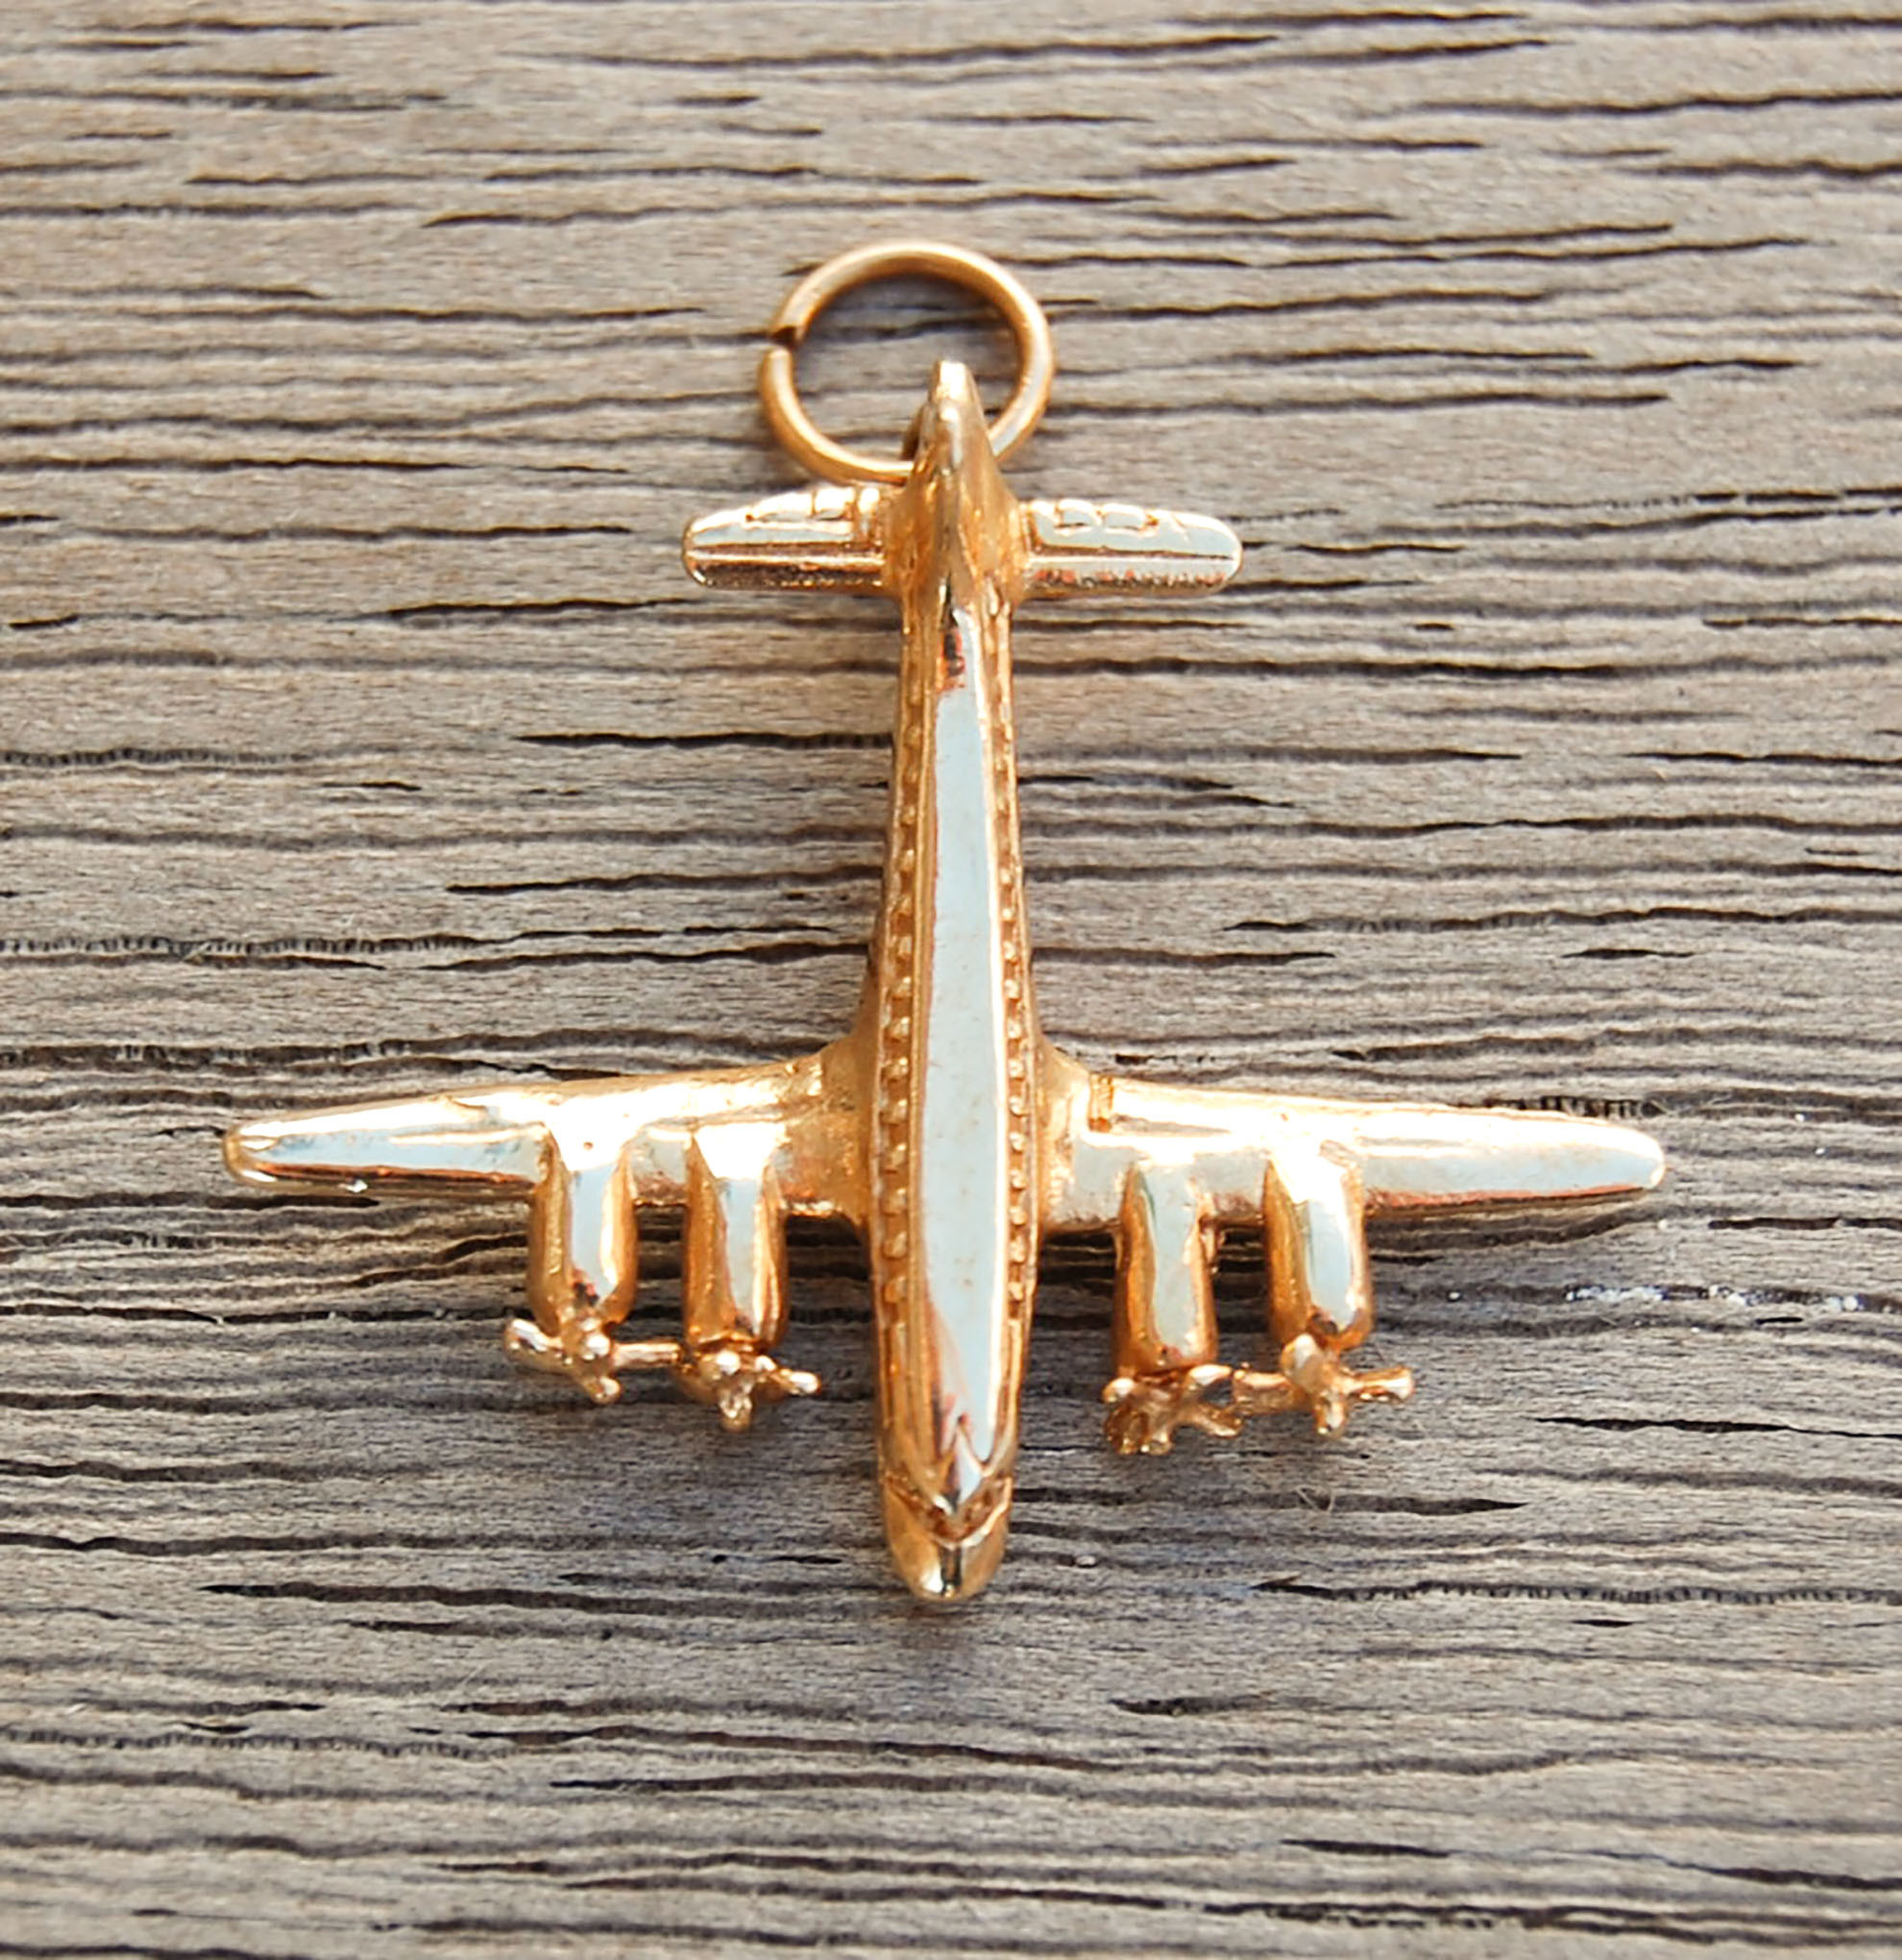 14K Gold Airplane Pendant Necklace